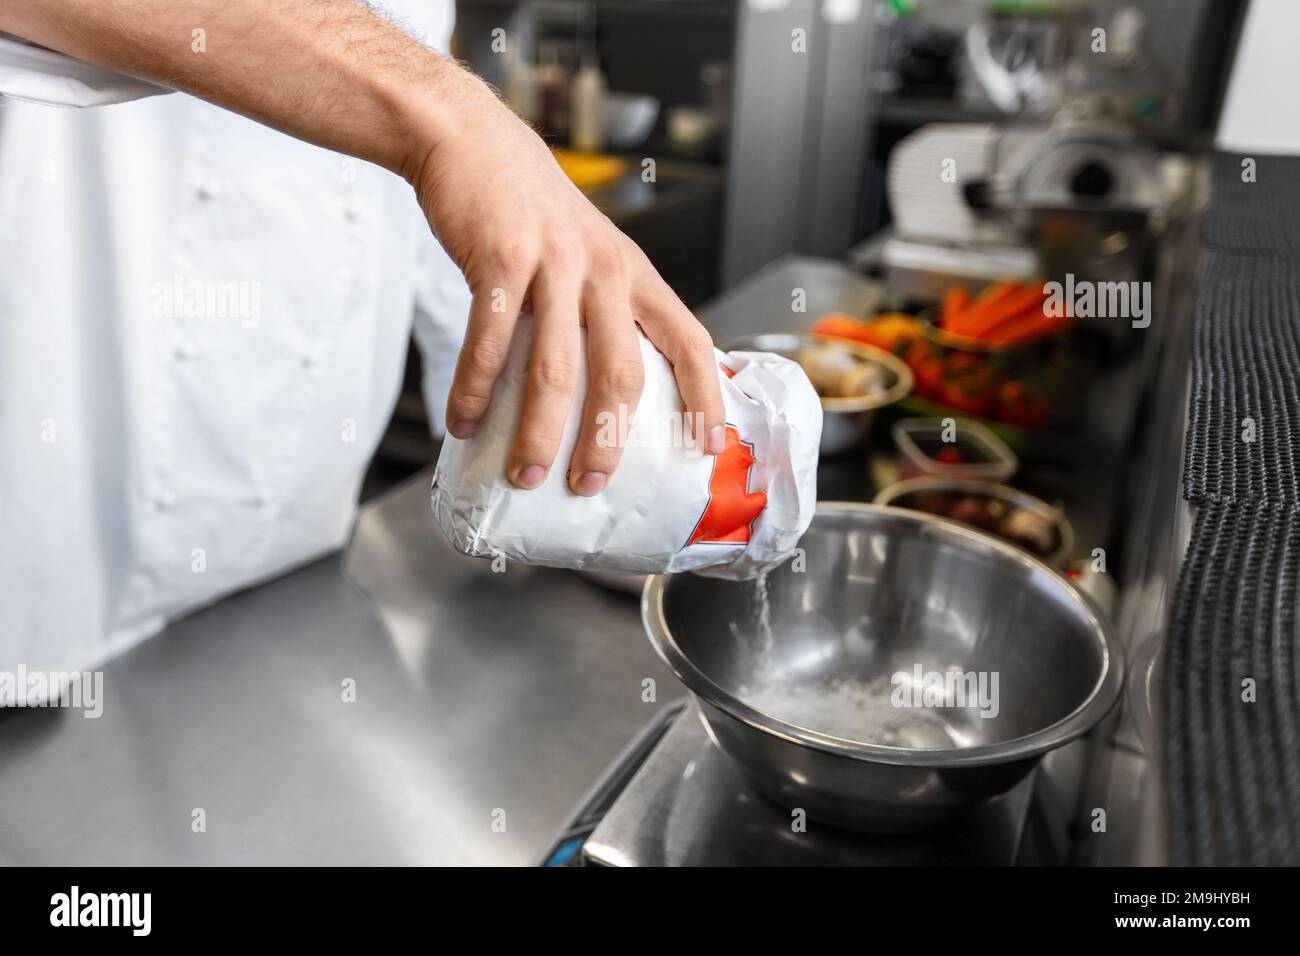 close up of chef cooking food at restaurant Stock Photo